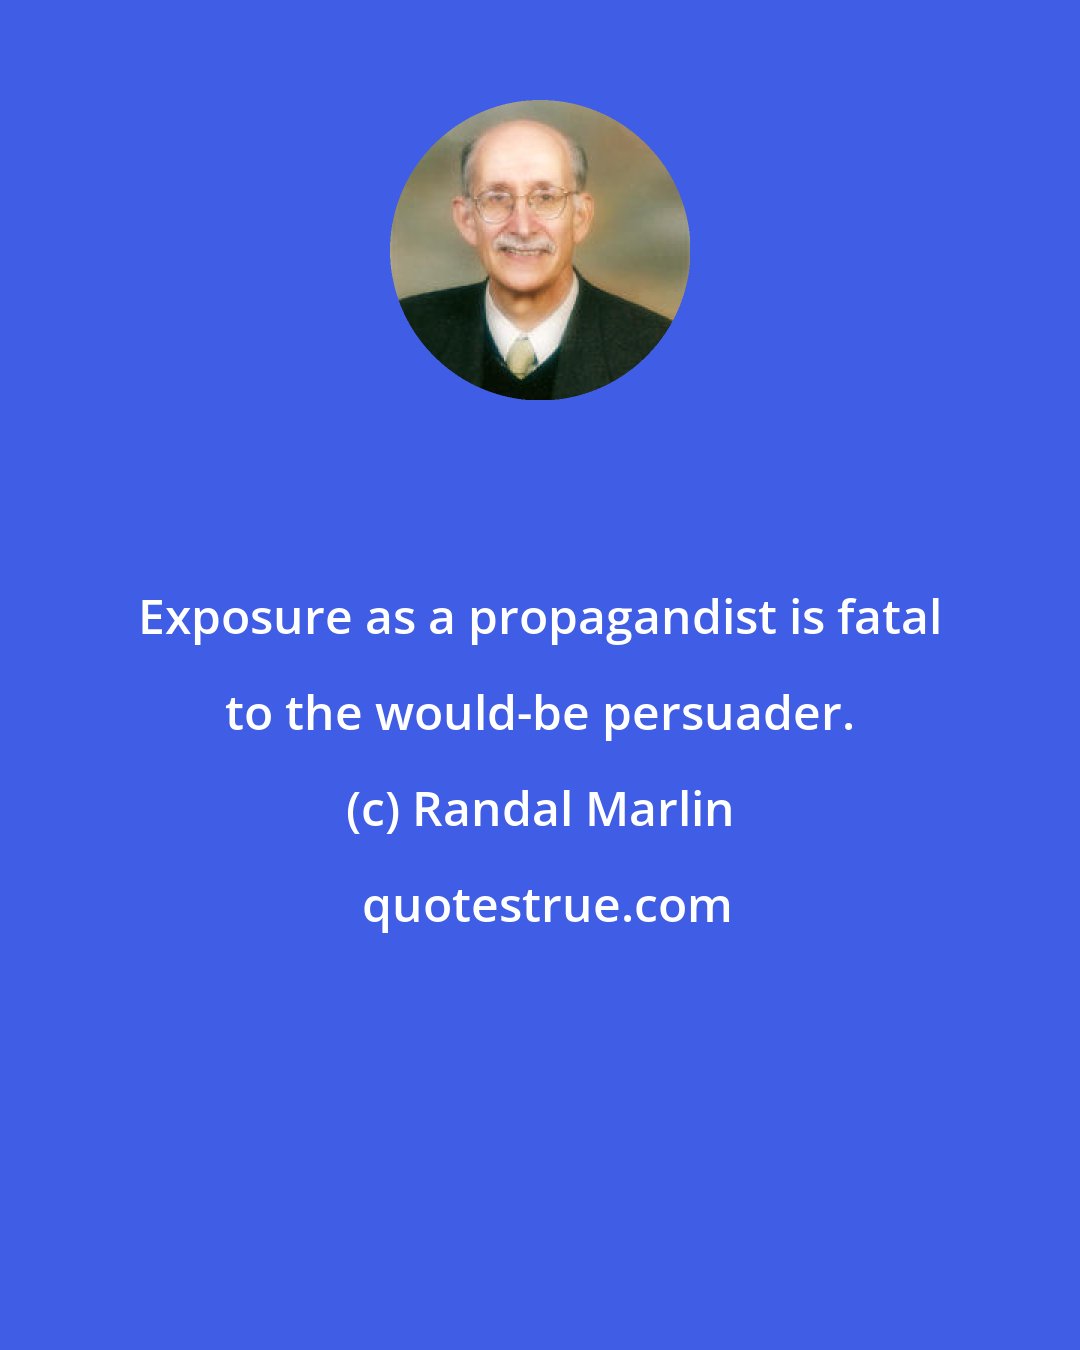 Randal Marlin: Exposure as a propagandist is fatal to the would-be persuader.